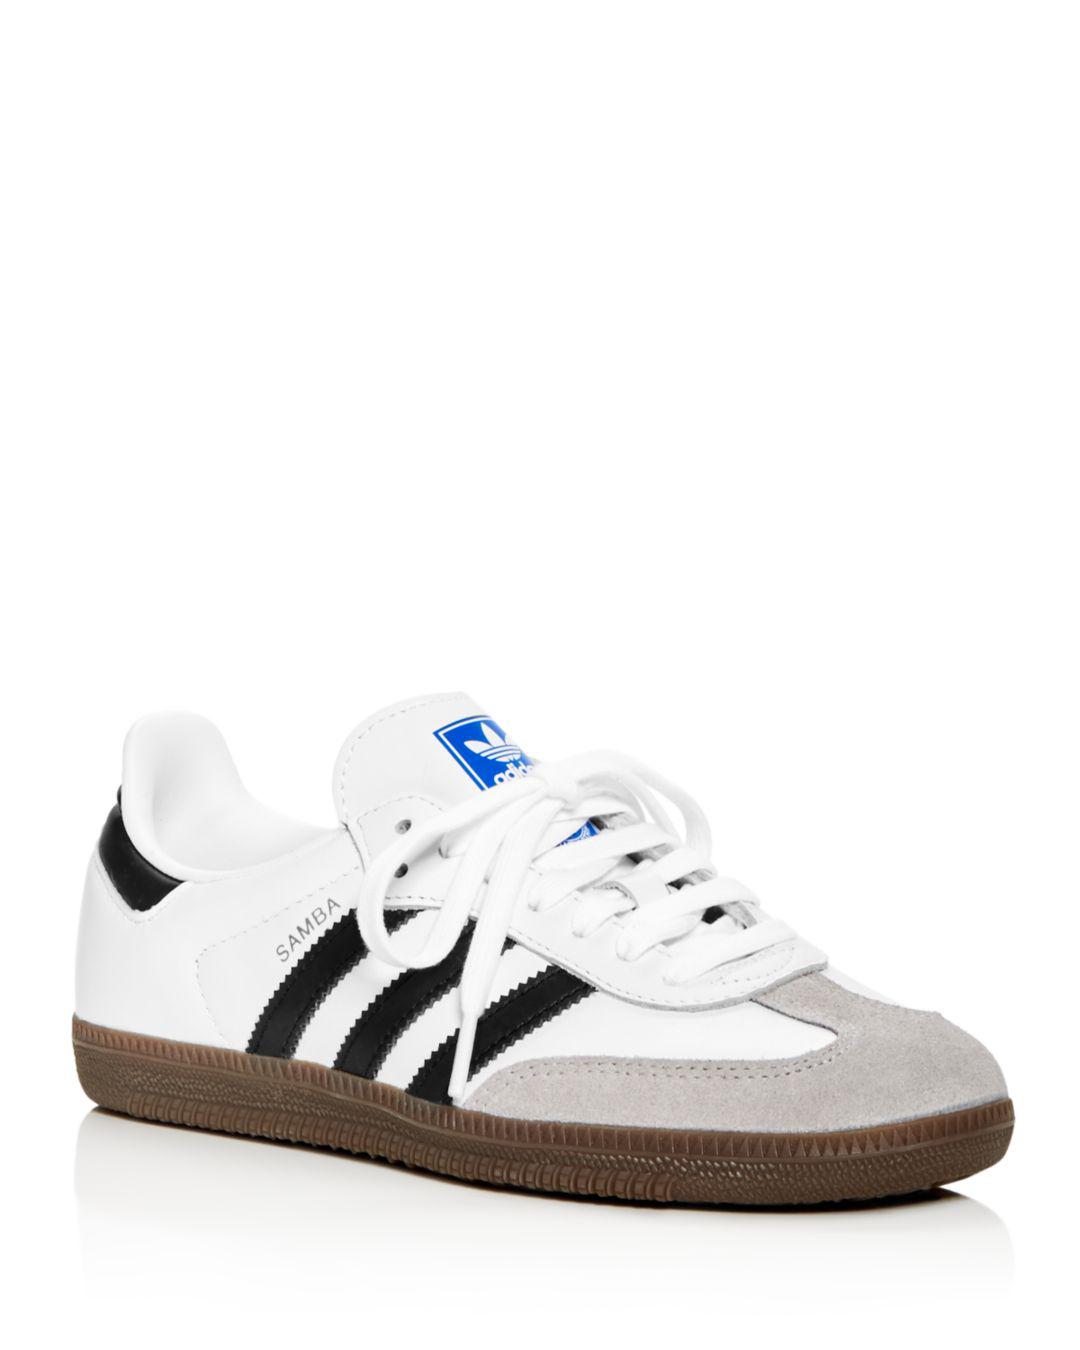 adidas Women's Samba Og Leather & Suede Lace Up Sneakers in White/Black  (White) | Lyst